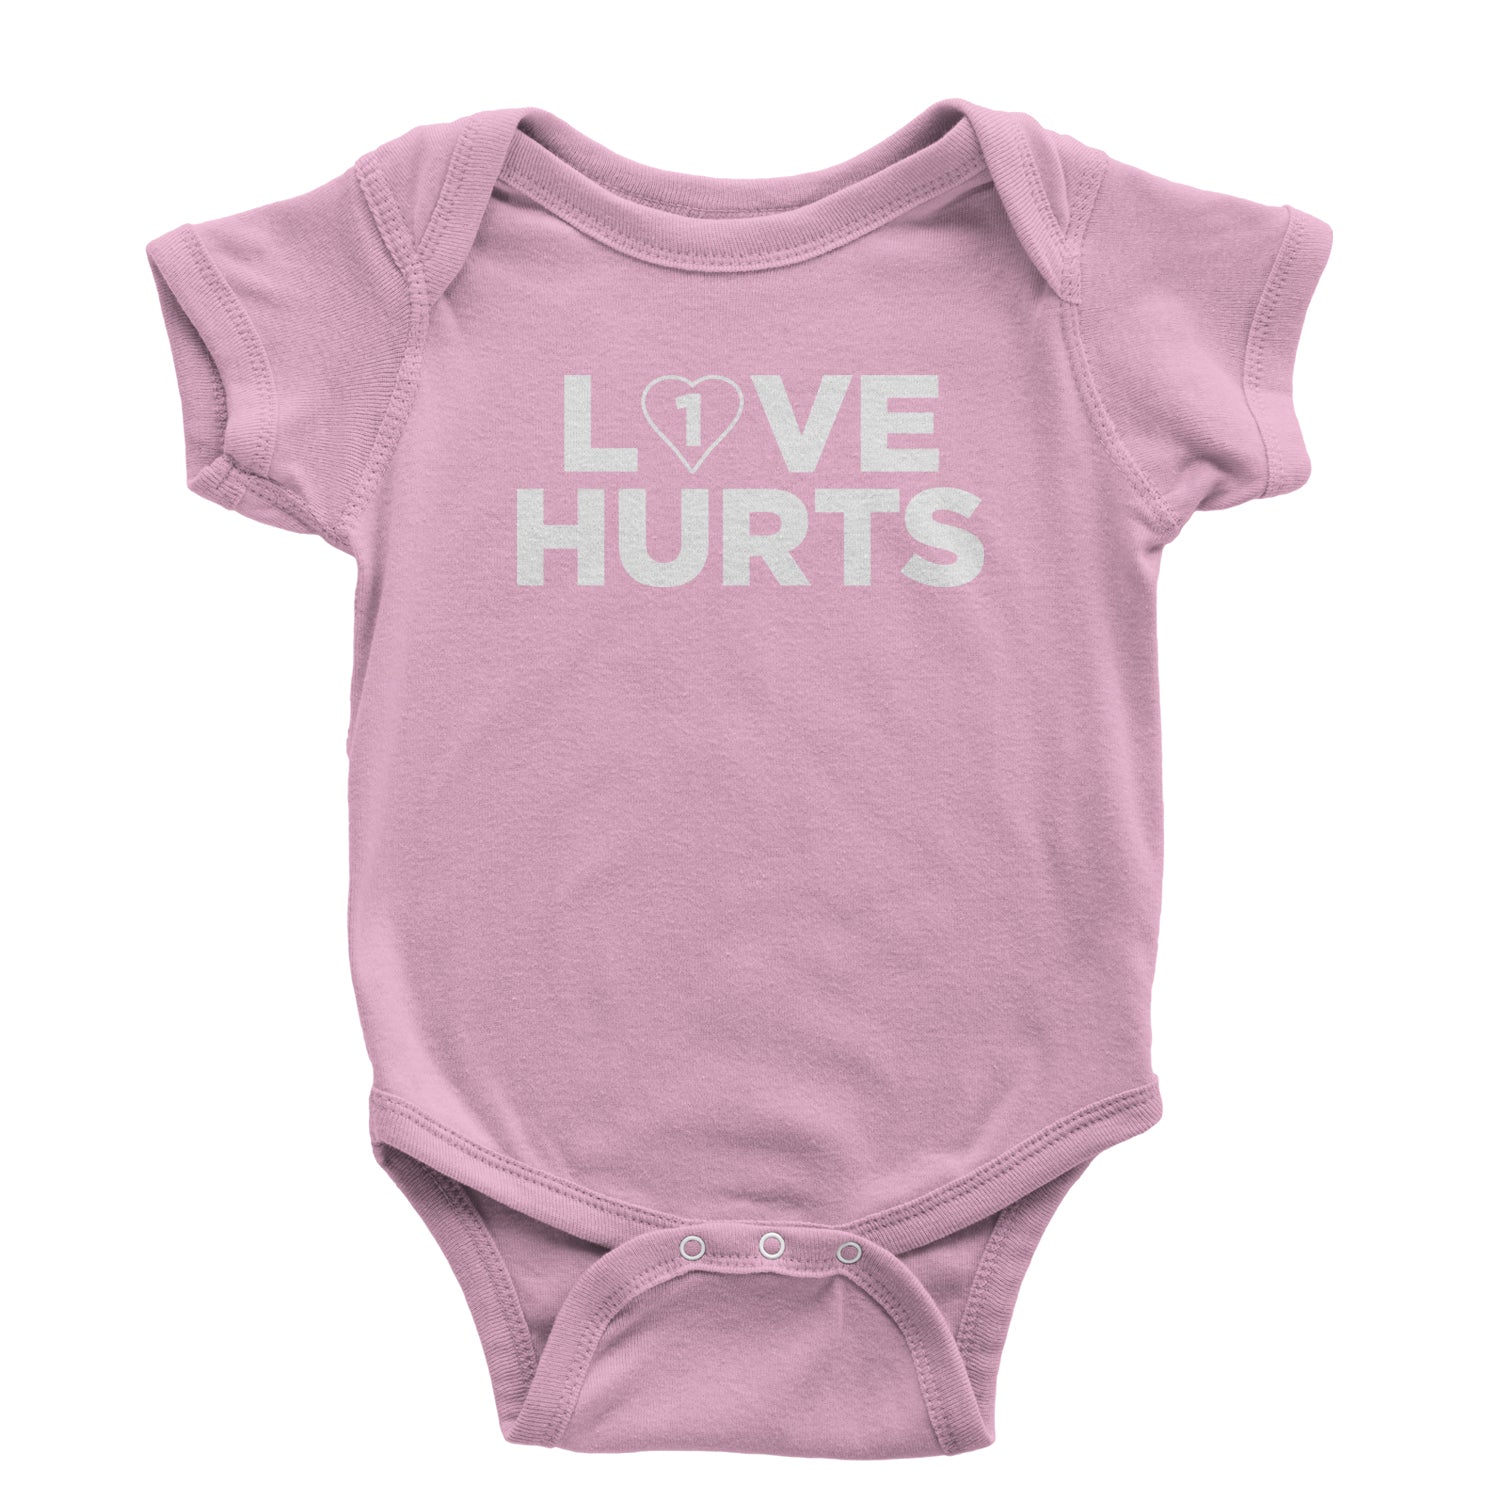 Love Hurts Philadelphia Infant One-Piece Romper Bodysuit and Toddler T-shirt birds, football, go, philly by Expression Tees